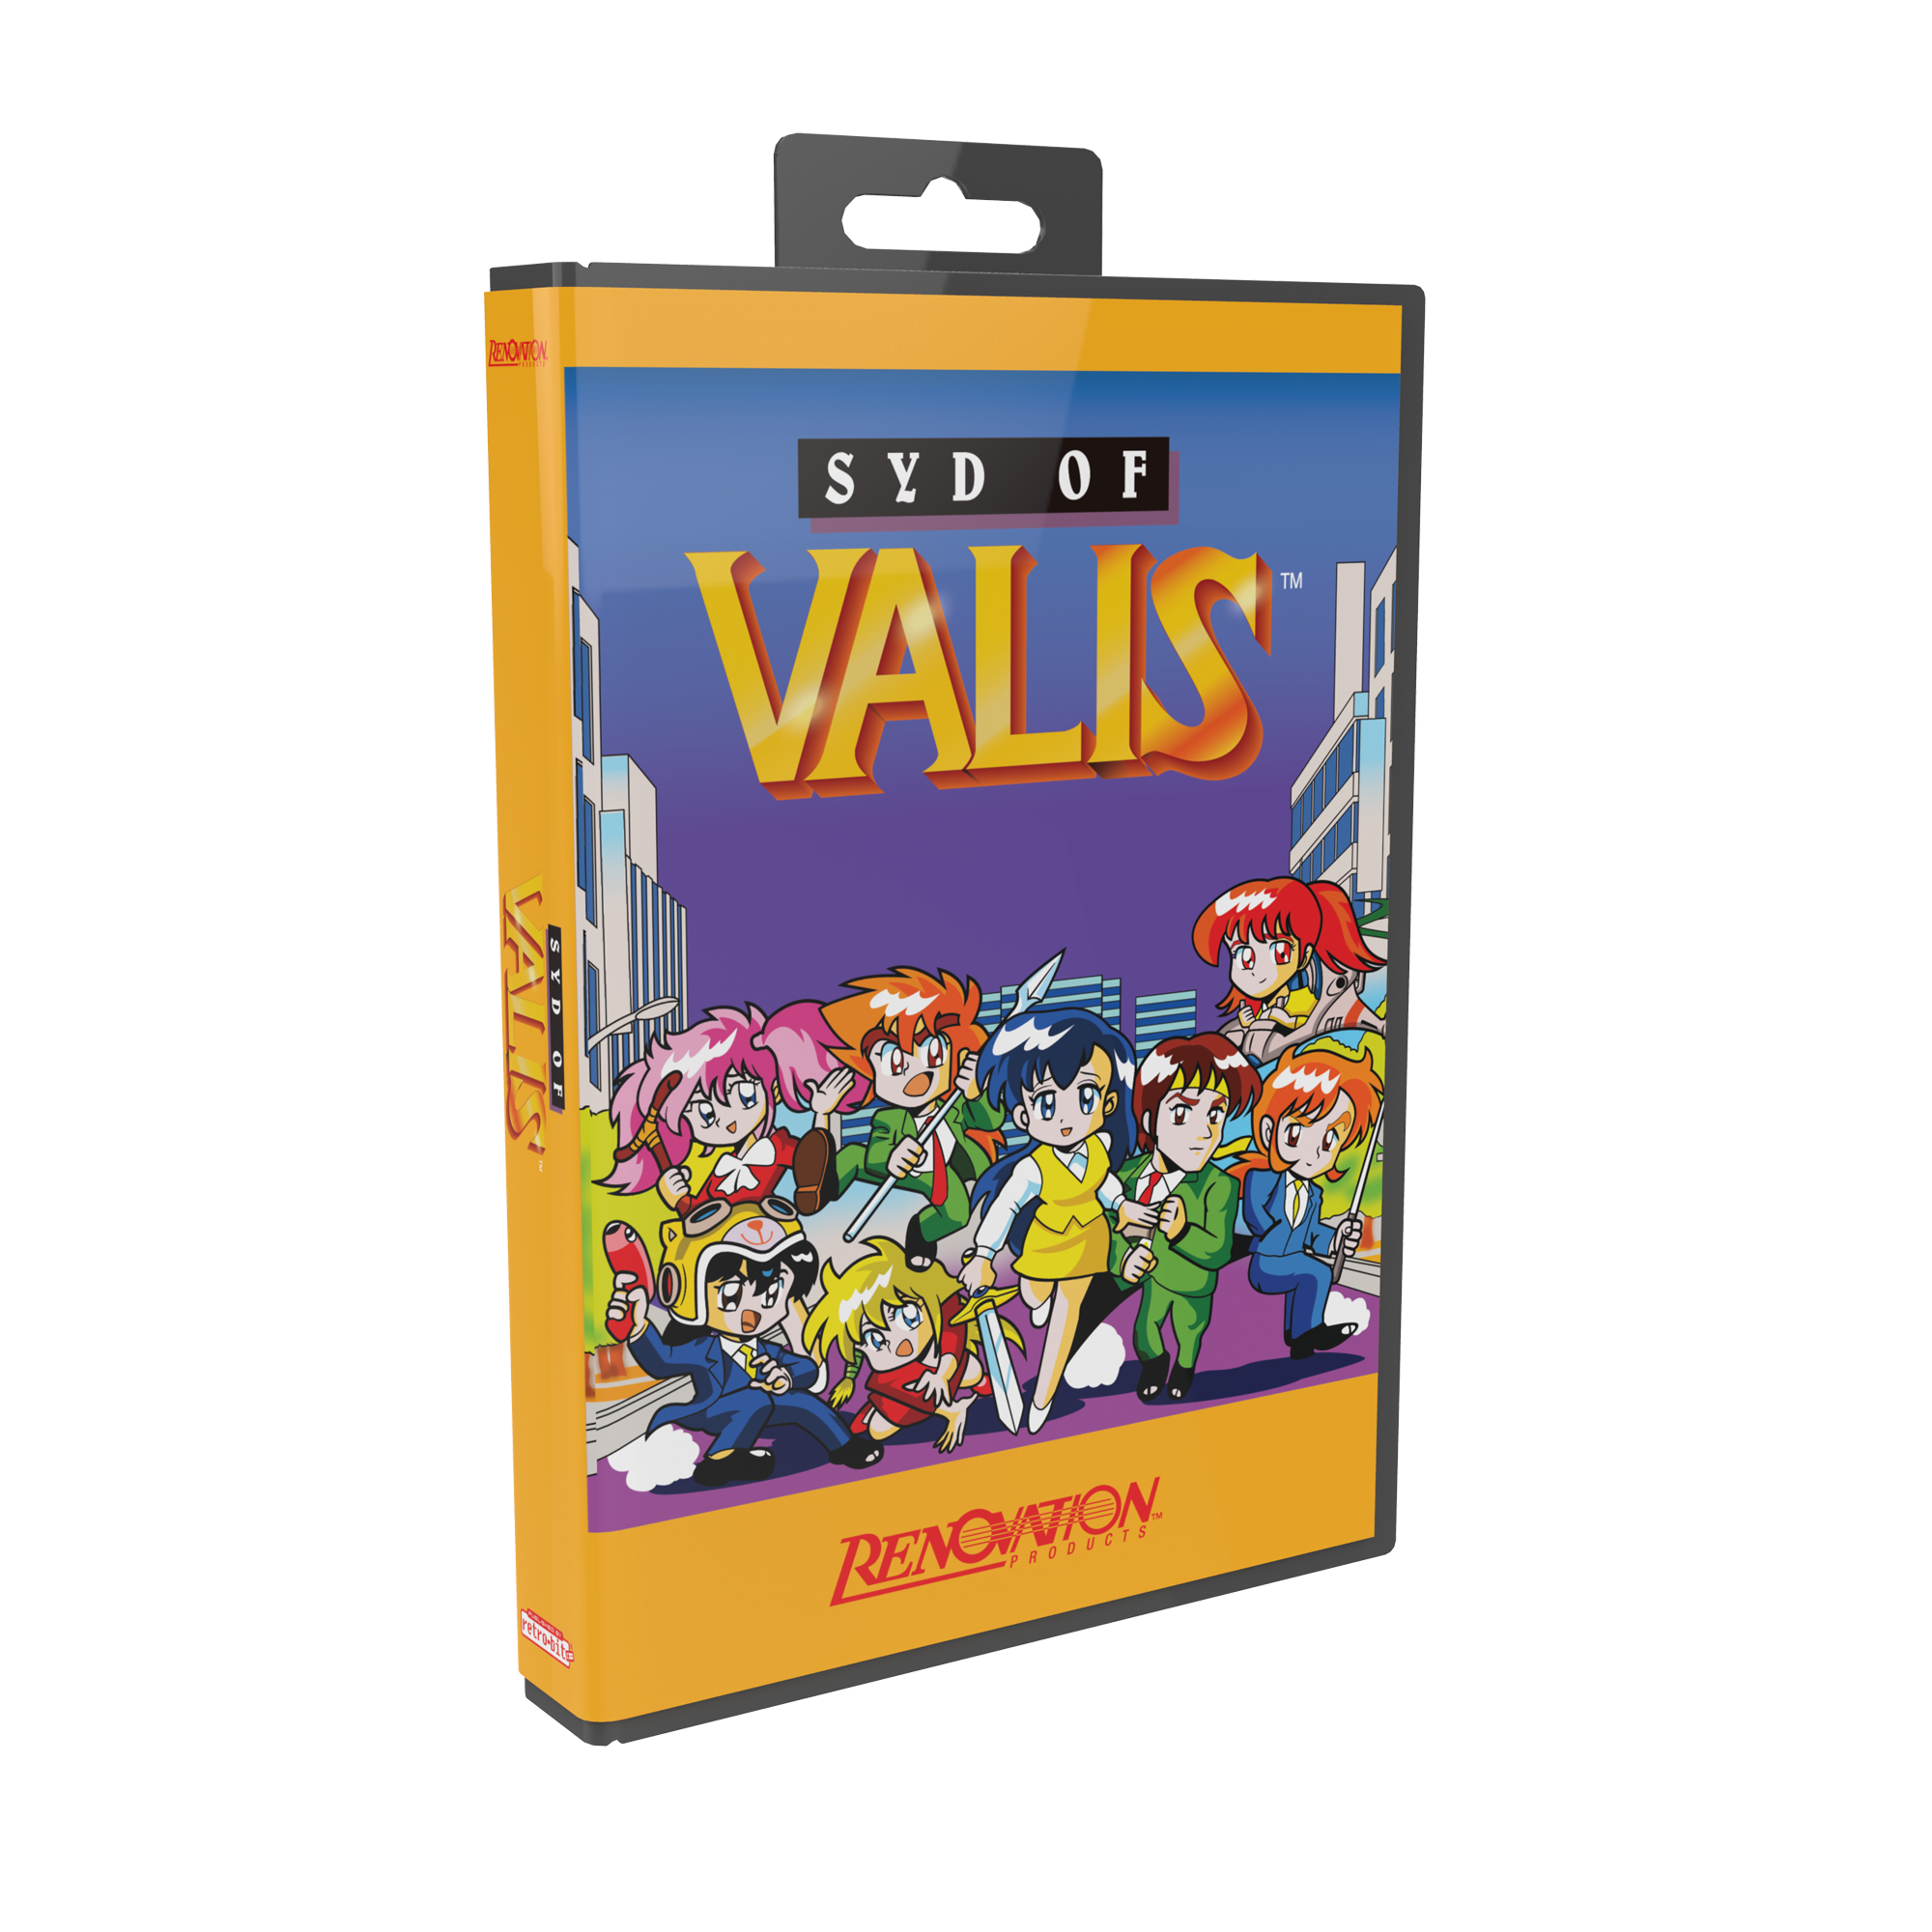 ValisCollectionPressKit Syd of Valis Cover B 01.png